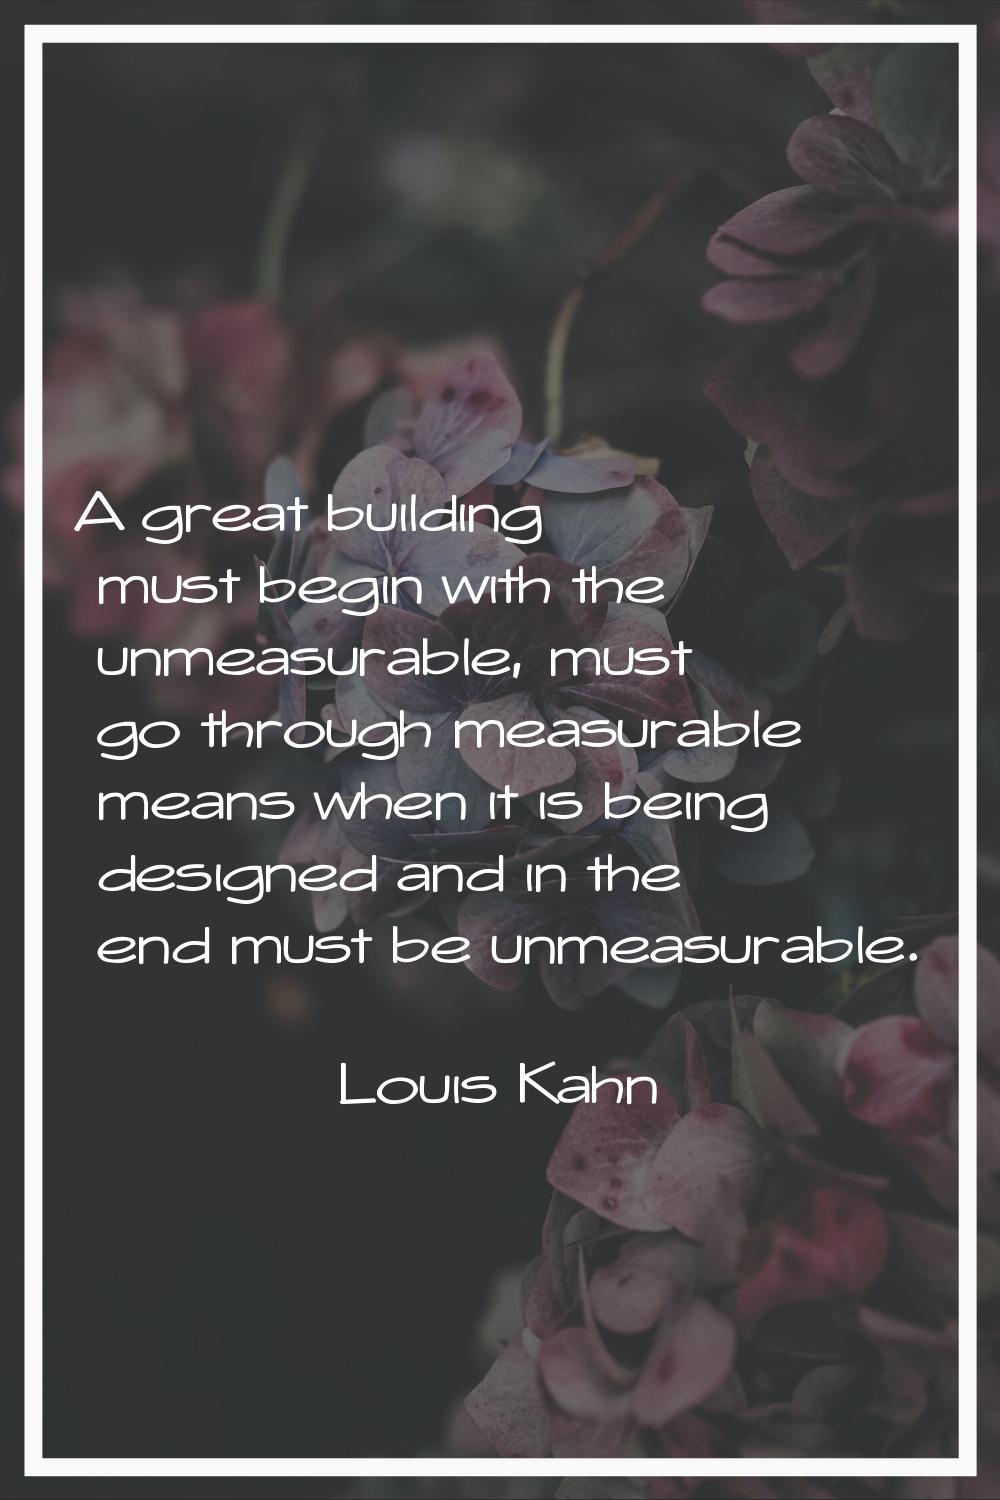 A great building must begin with the unmeasurable, must go through measurable means when it is bein